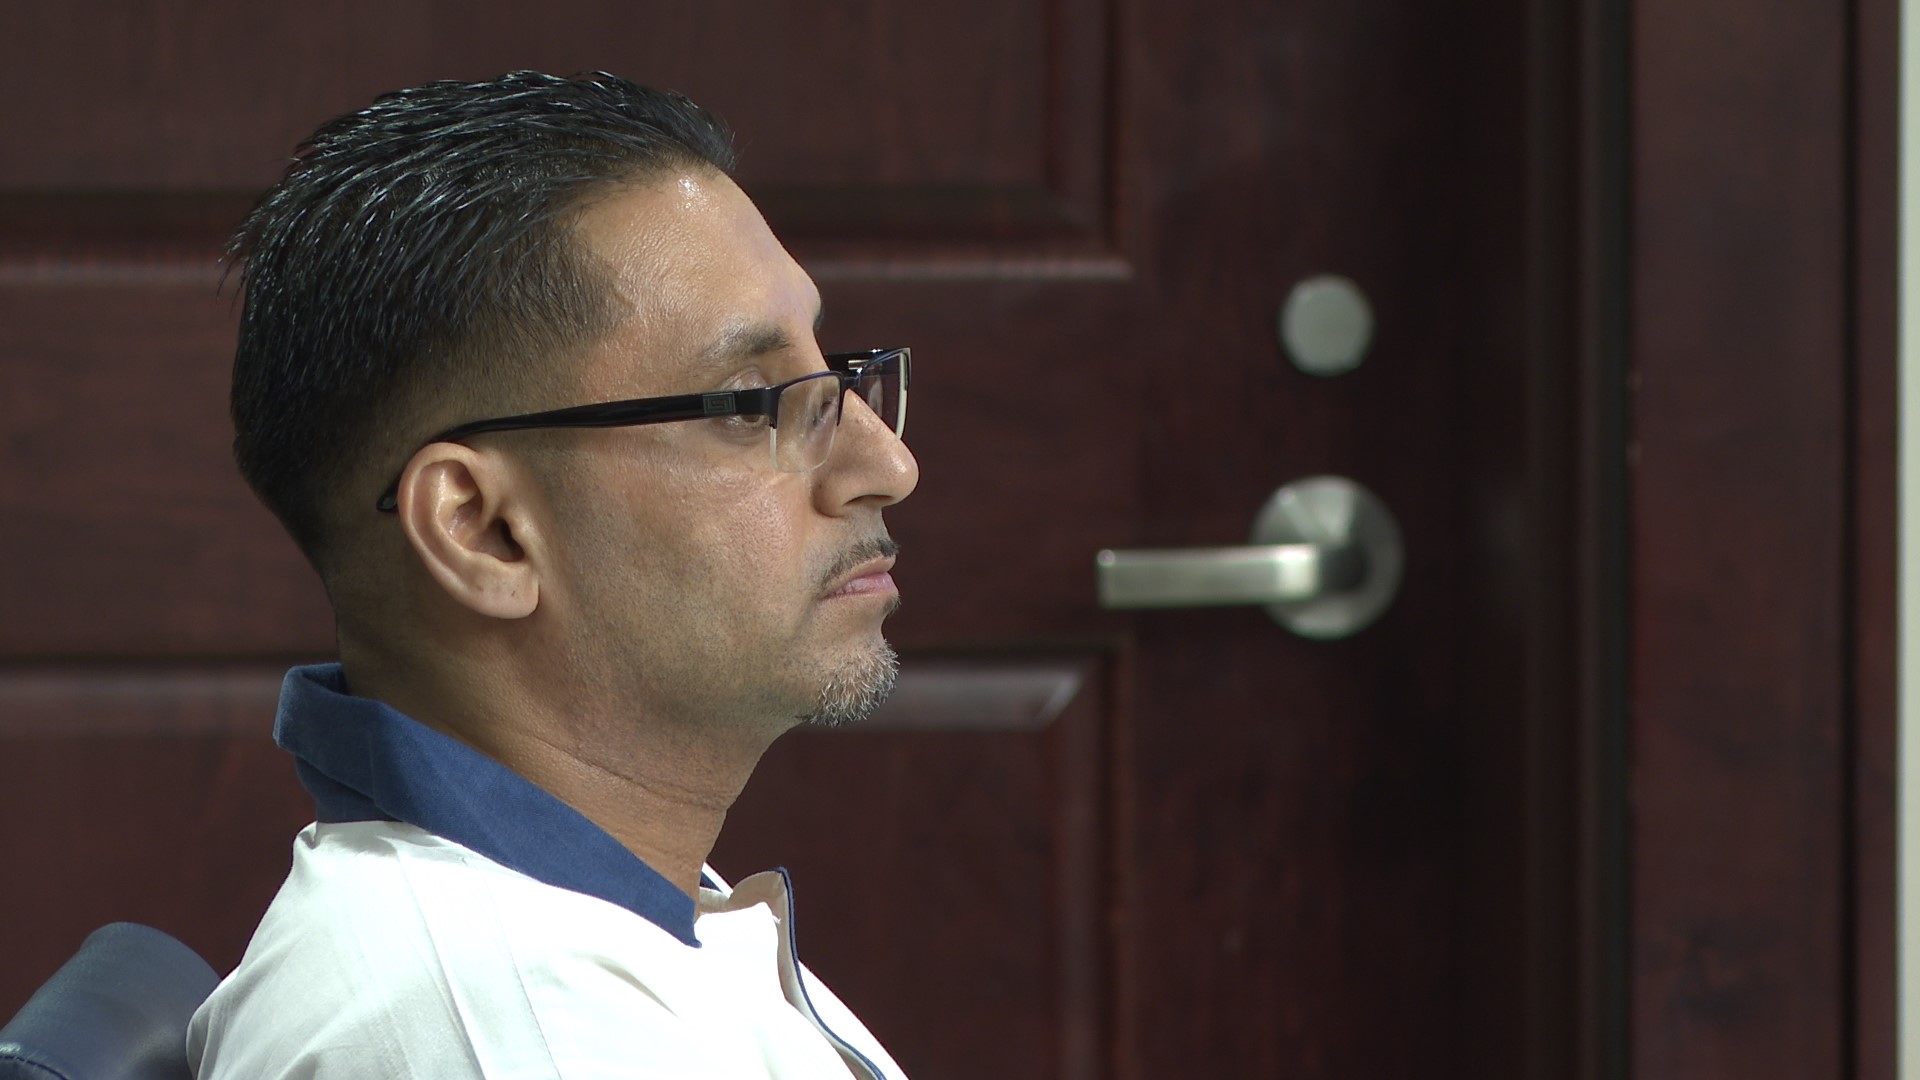 Sonny Bharadia says after 22 years behind bars his case is proof new evidence doesn’t always mean a new trial. He's hoping a Gwinnett County judge changes that.